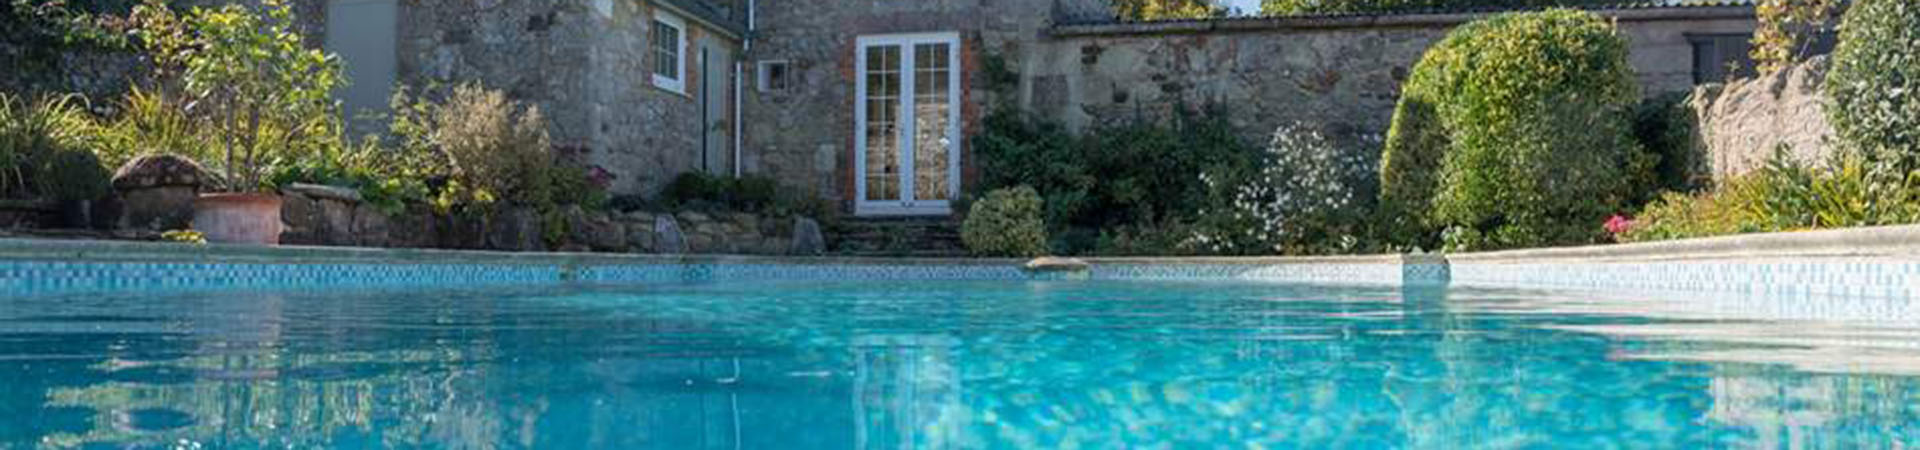 Holiday cottages with pools in Lincolnshire